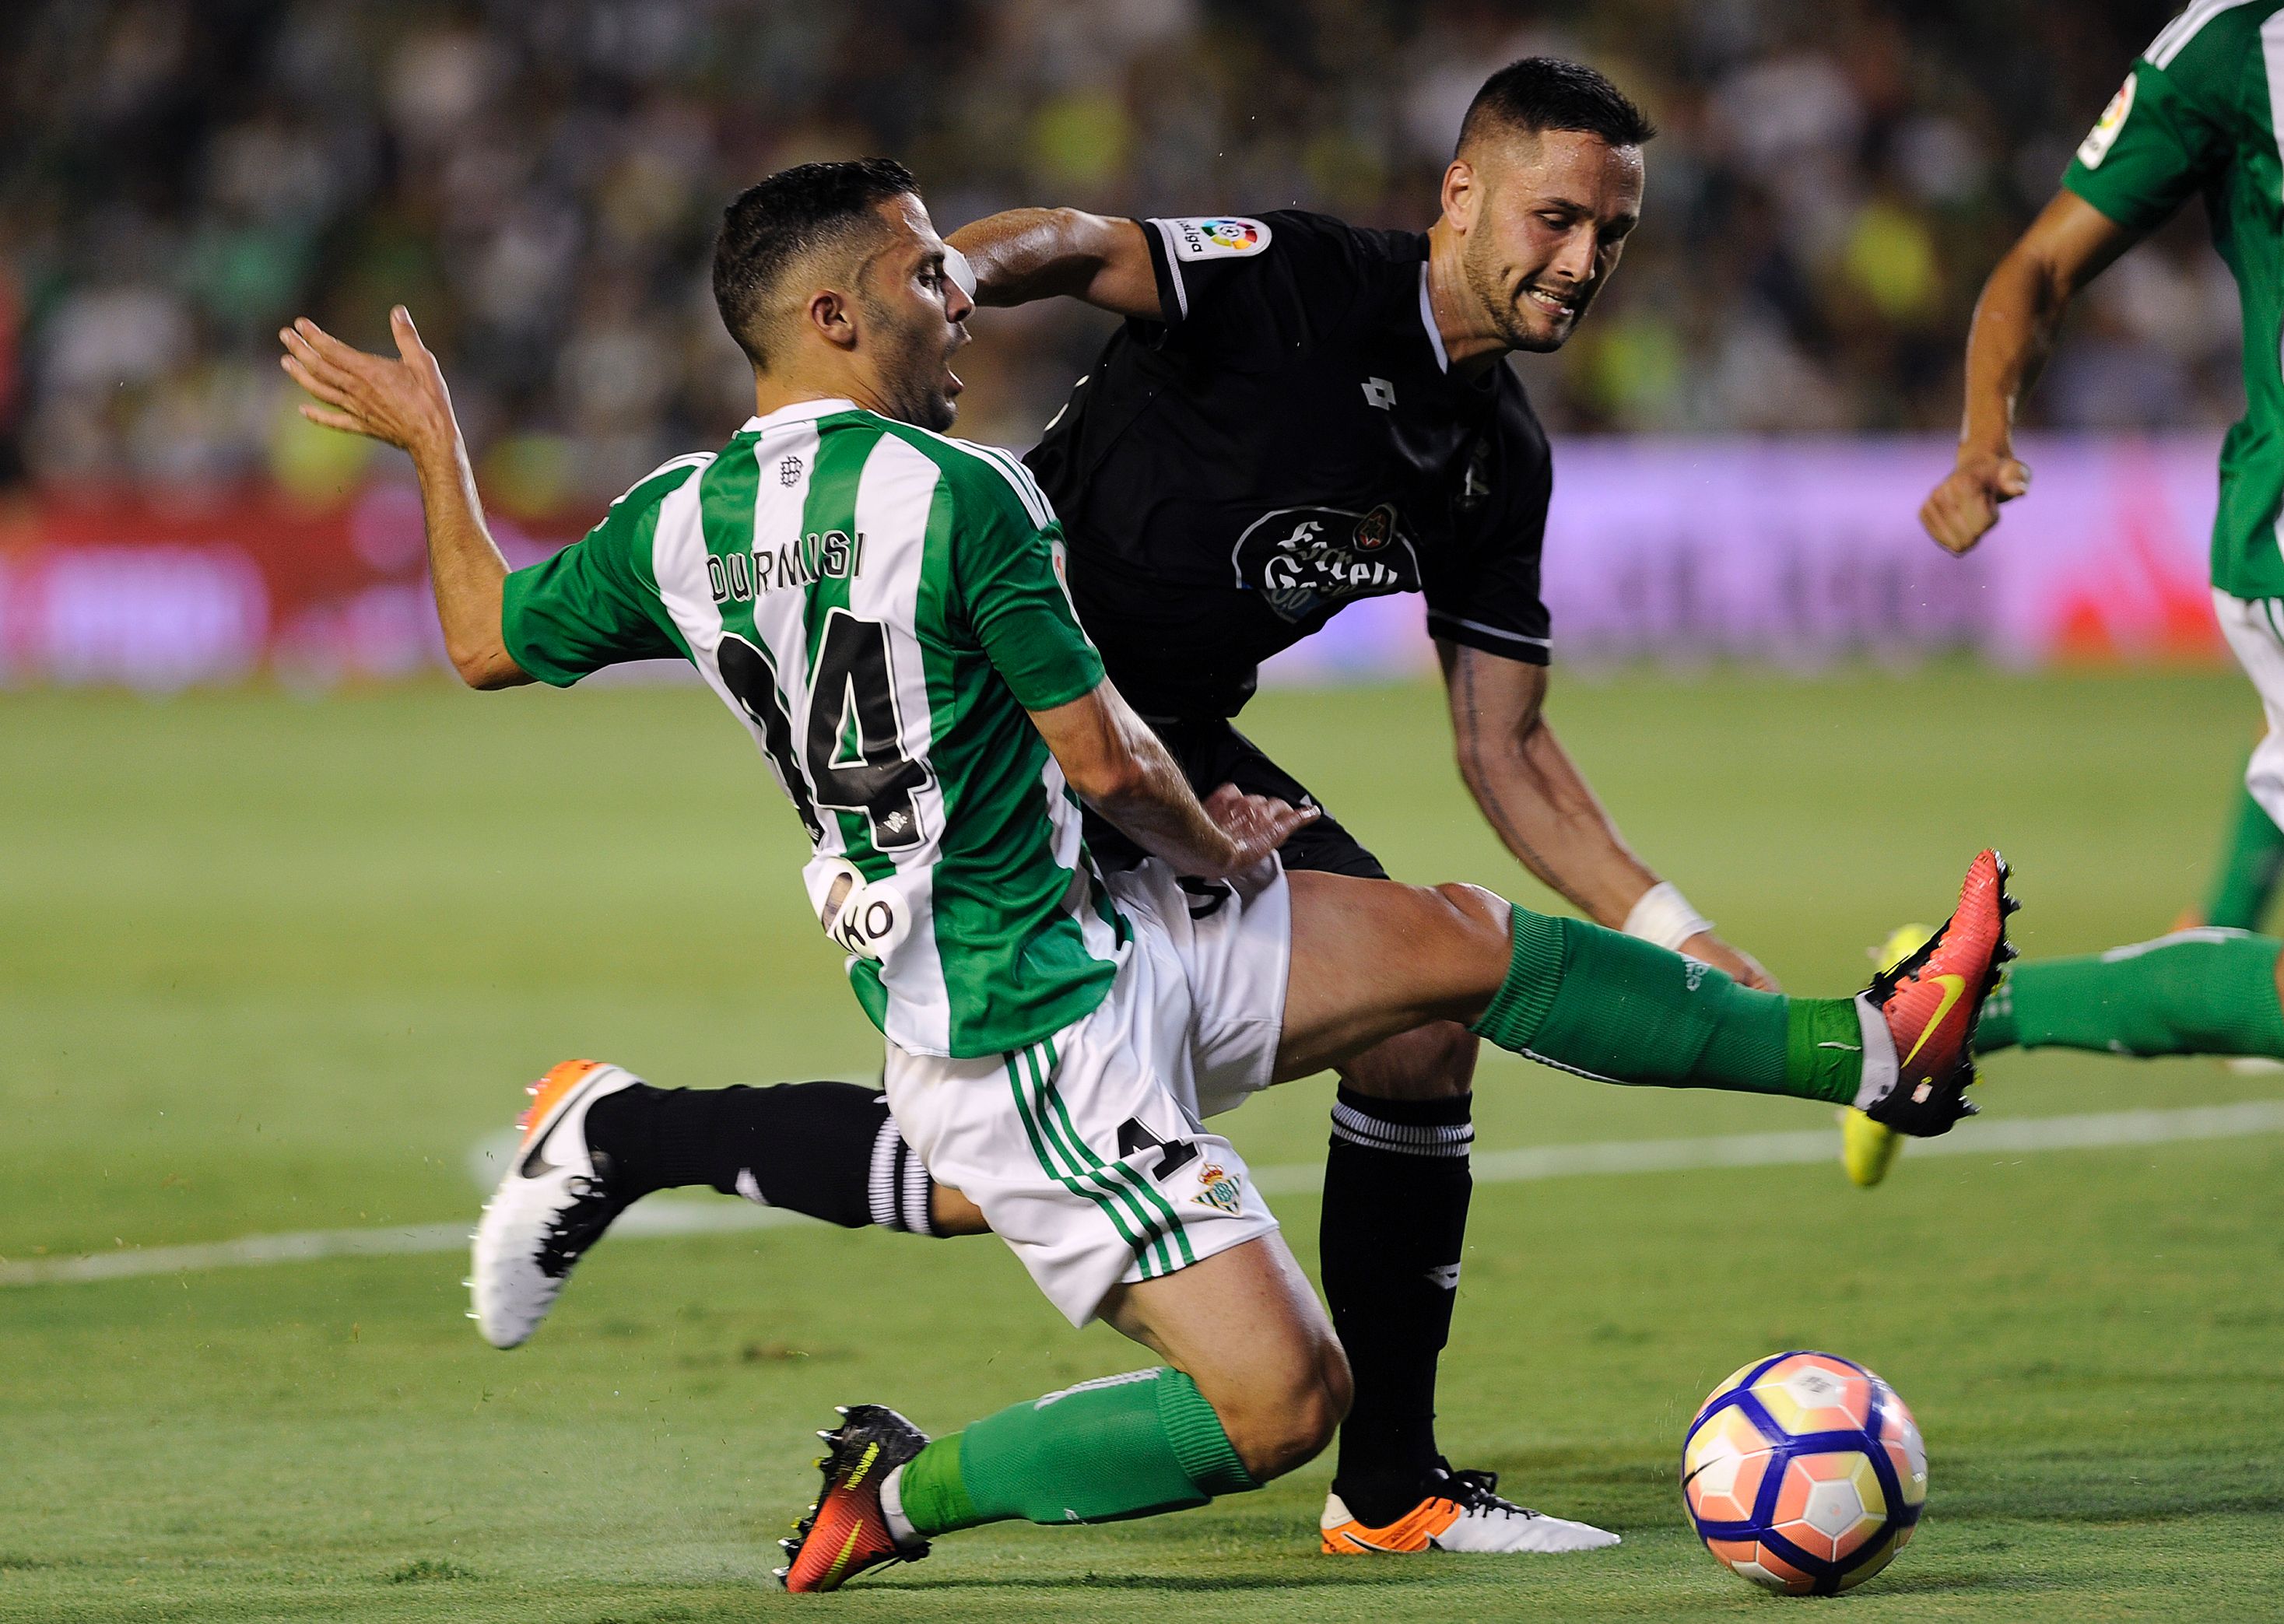 Durmisi has impressed since his move to Real Betis. (Photo courtesy - Cristina Quilcer/AFP/Getty Images)